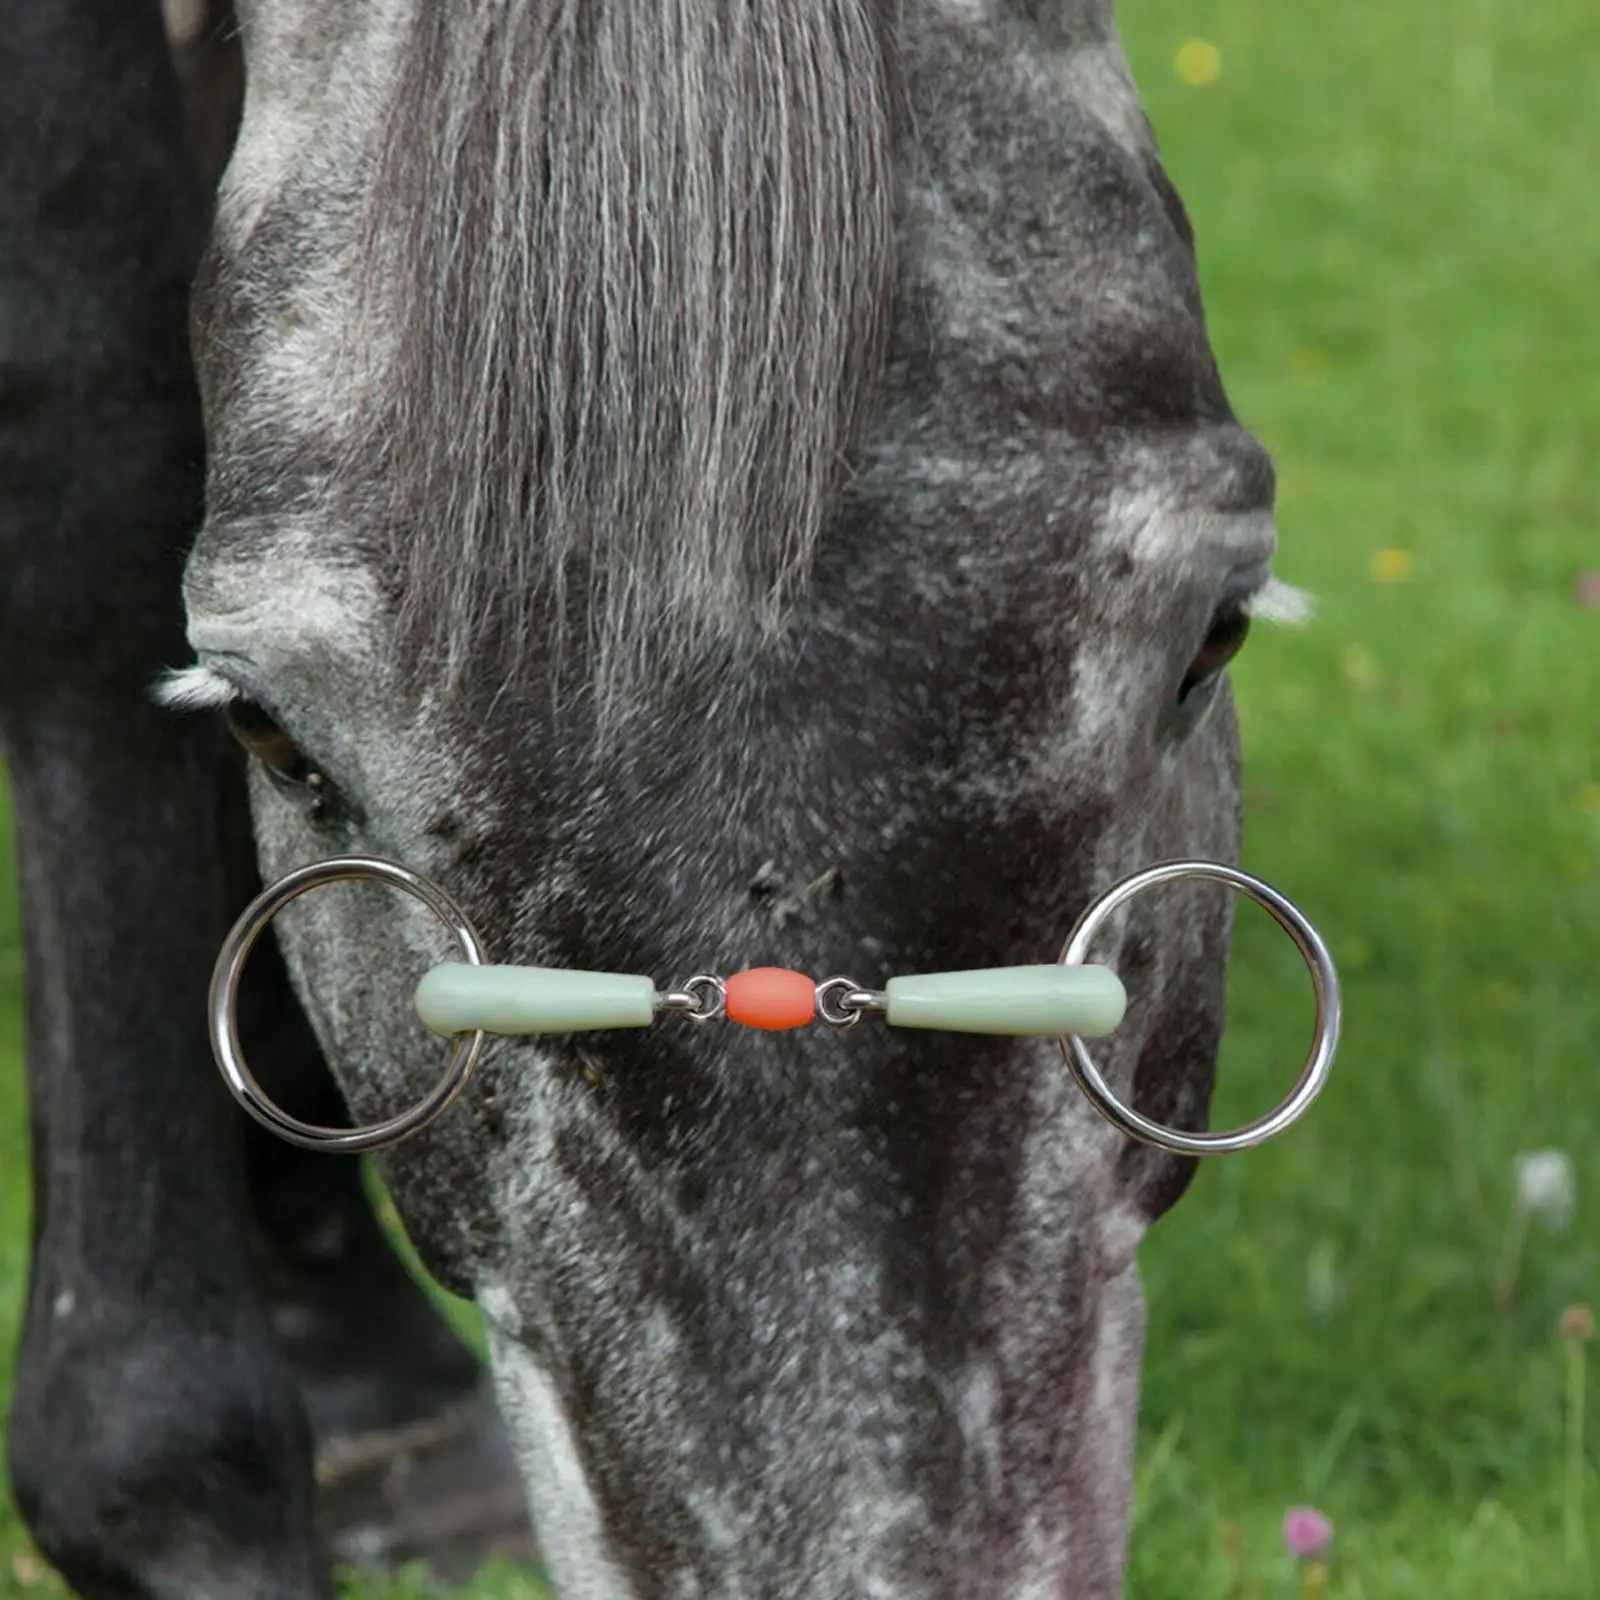 Professional Horse Mouth Bit Stainless Steel Snaffle Bits for Horse Chewing